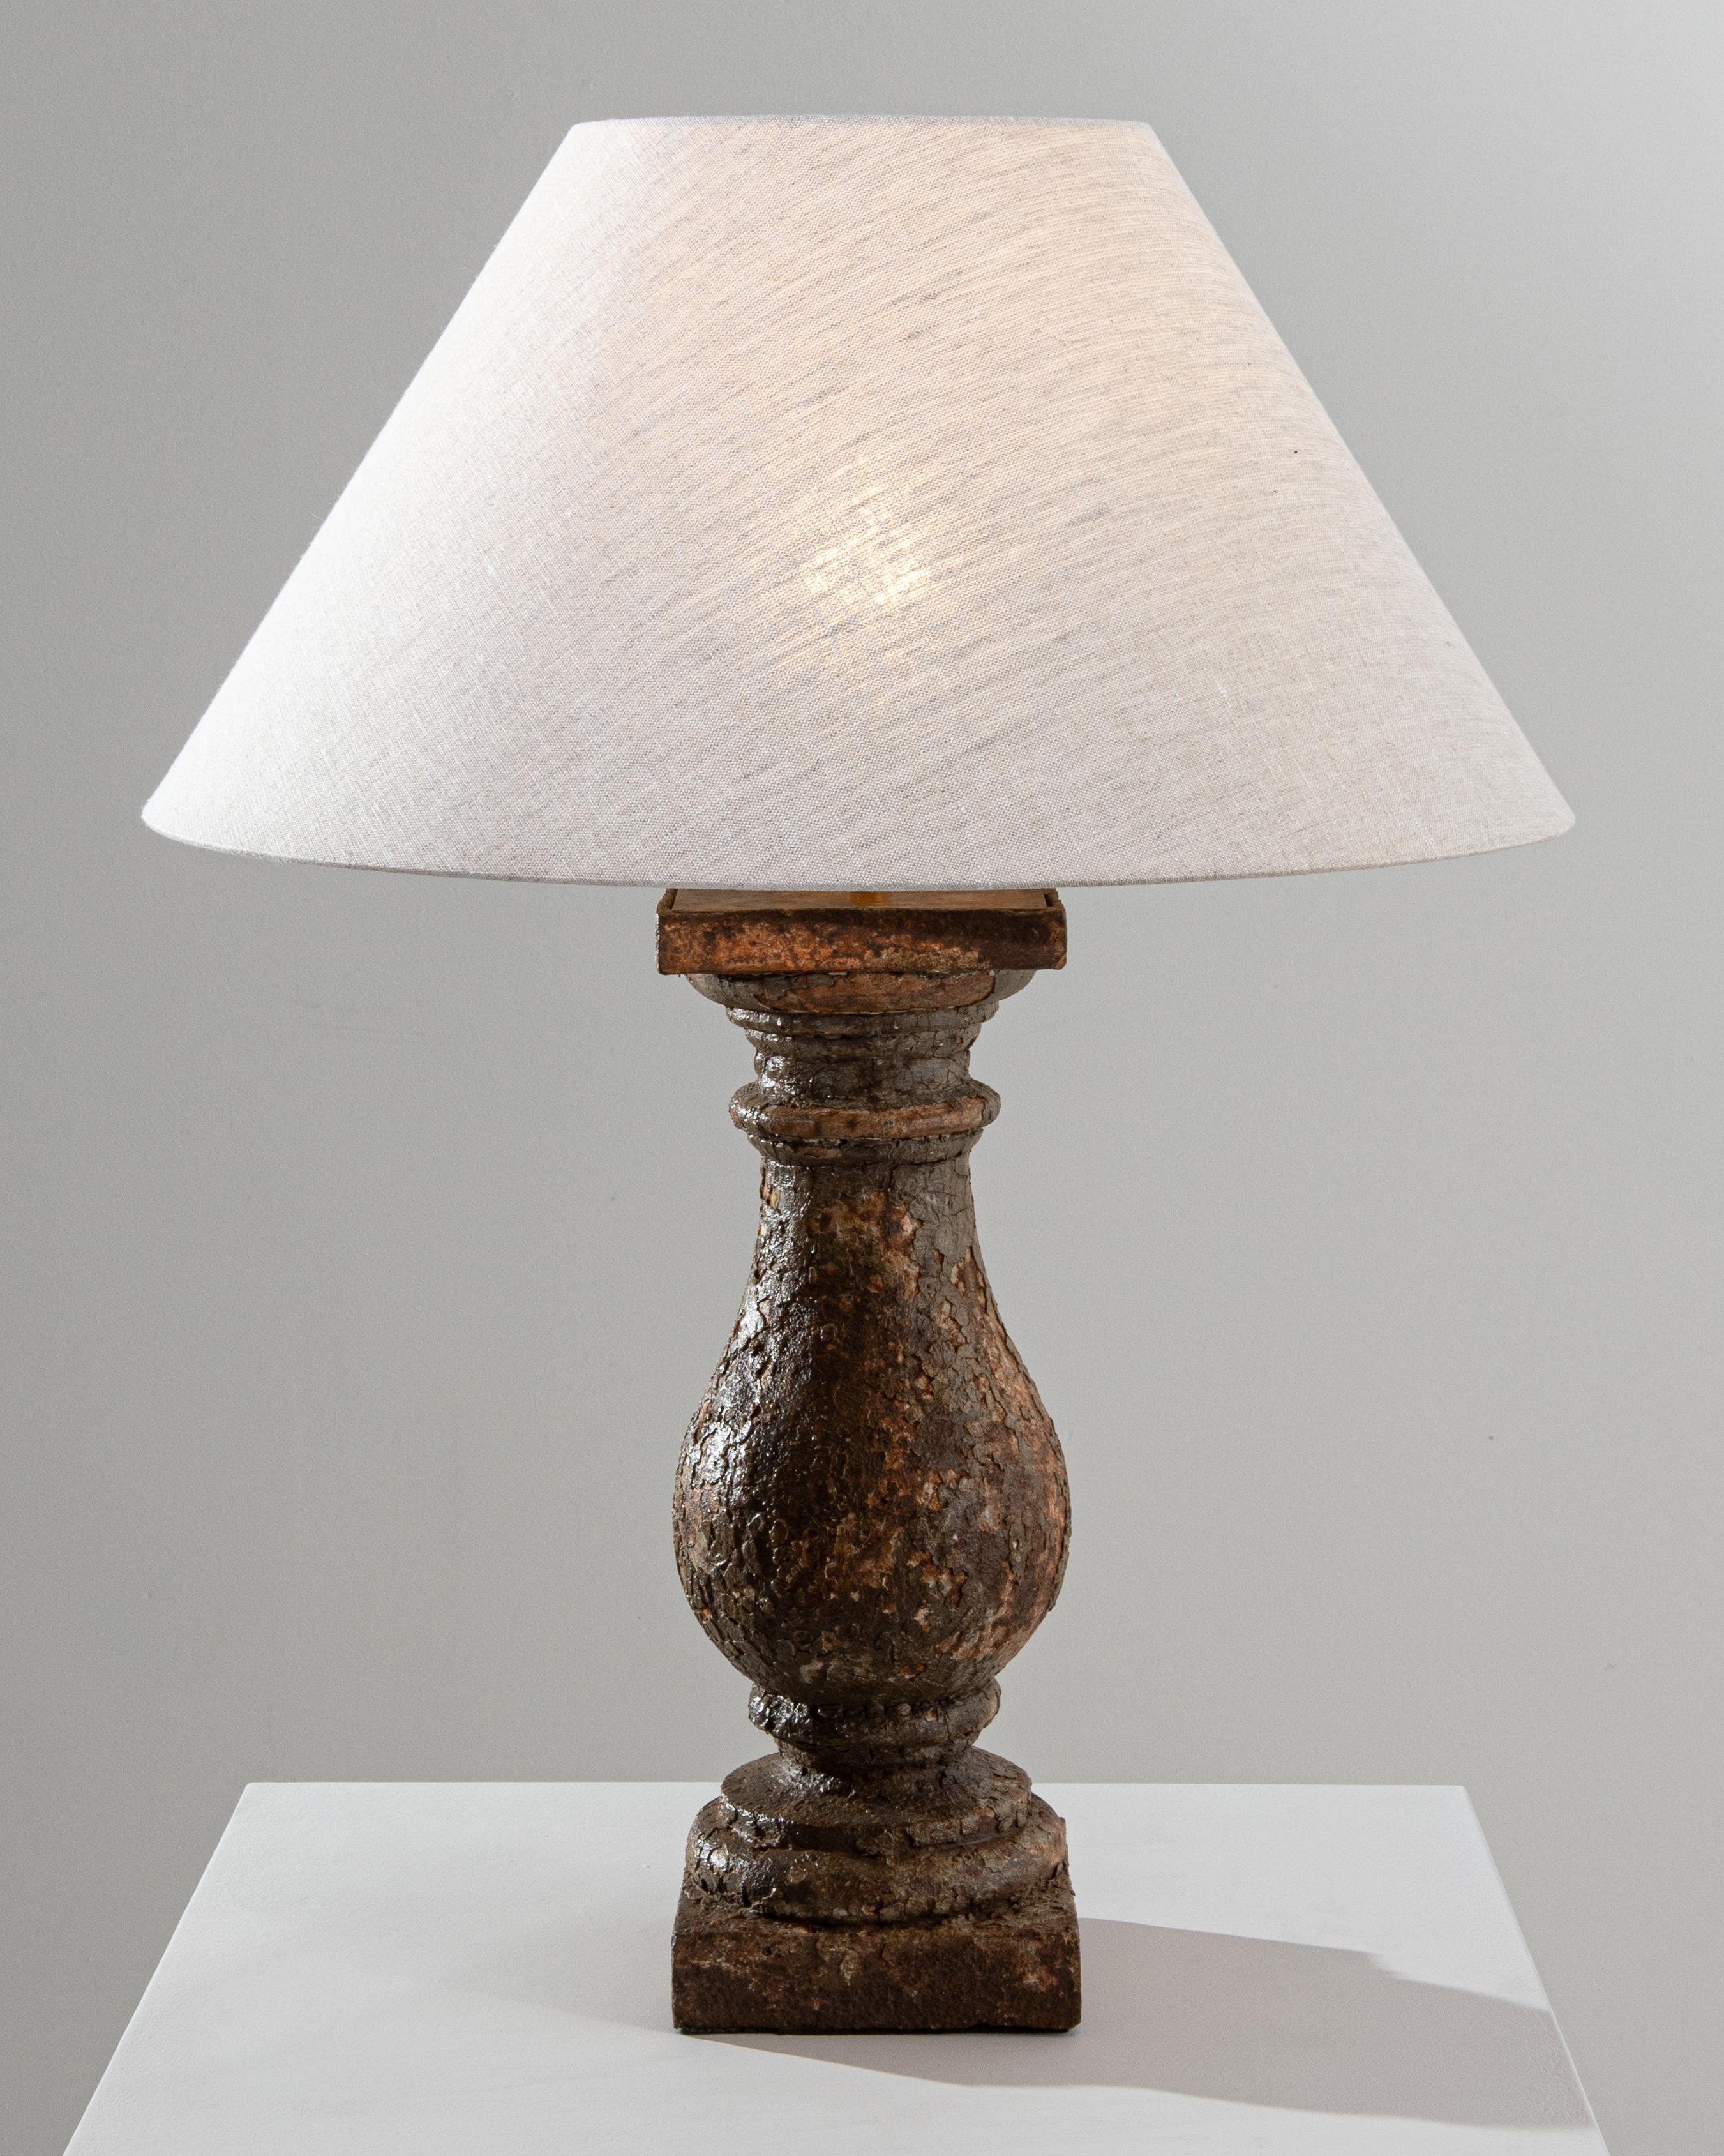 Confounding and timelessly elegant, this solid metal lamp, made from a 19th century French architectural element, impresses at first sight. With age, the surface of the cast iron base has slowly patinated, creating a compelling collage of browns and